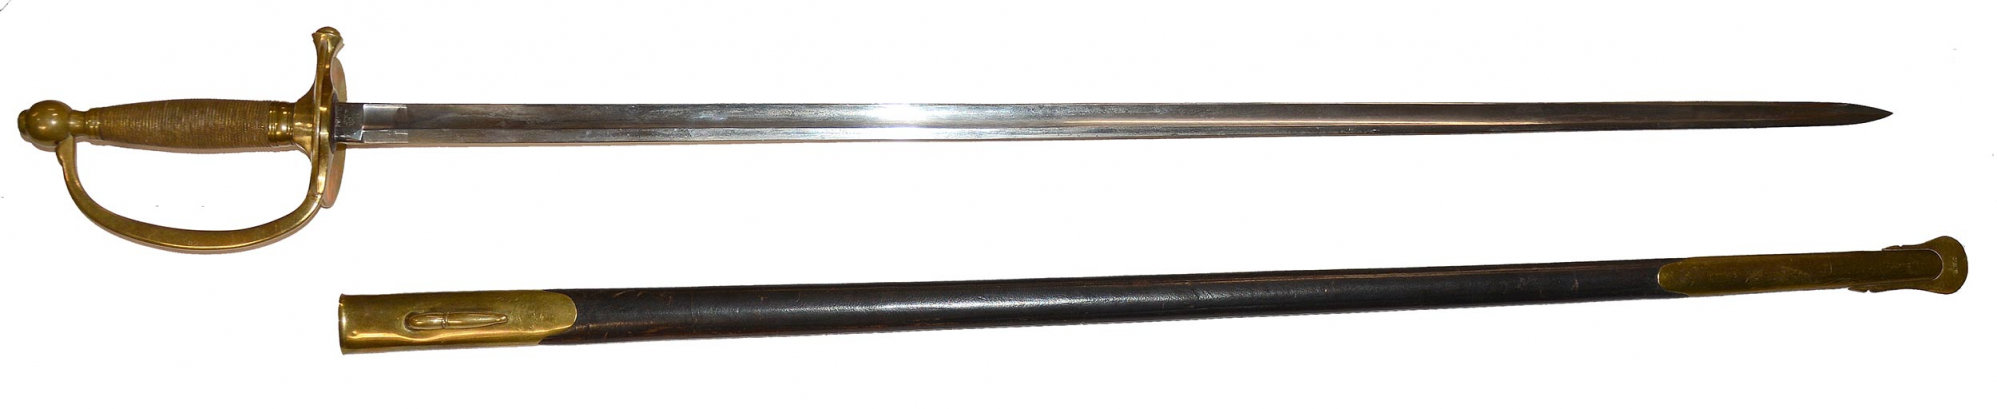 AMES MODEL 1840 NCO SWORD WITH SCABBARD DATED 1864